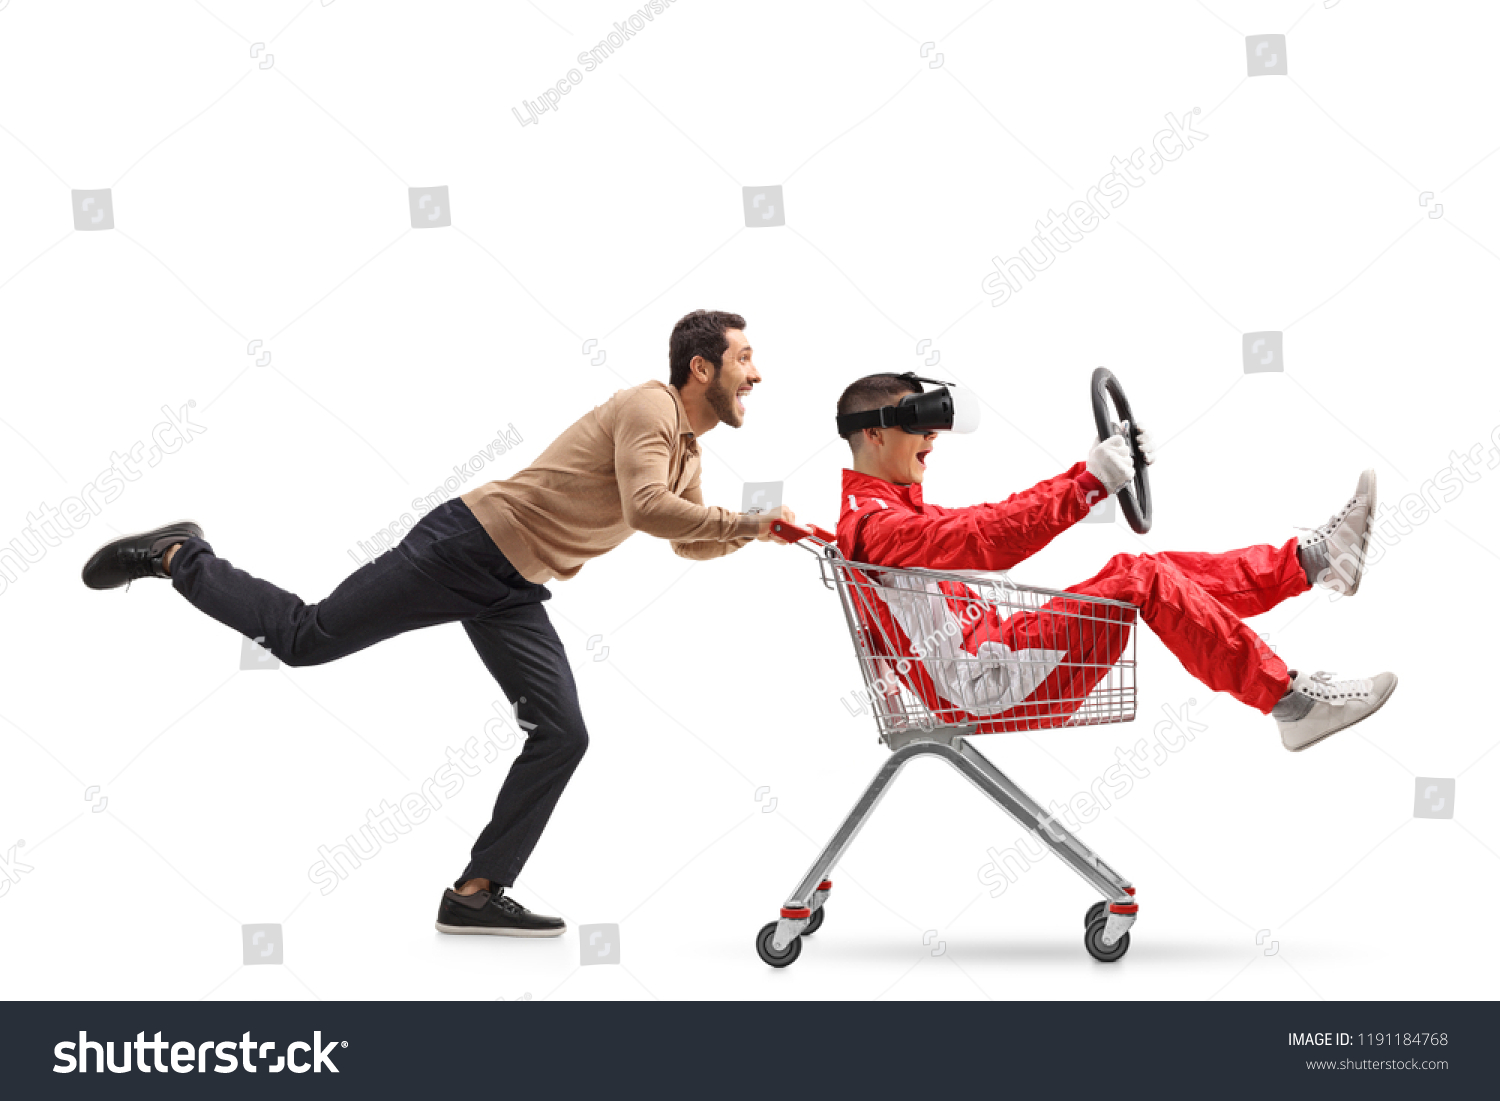 Teenager in a racing suit with VR googles in a shopping cart being pushed by a young man isolated on white background #1191184768